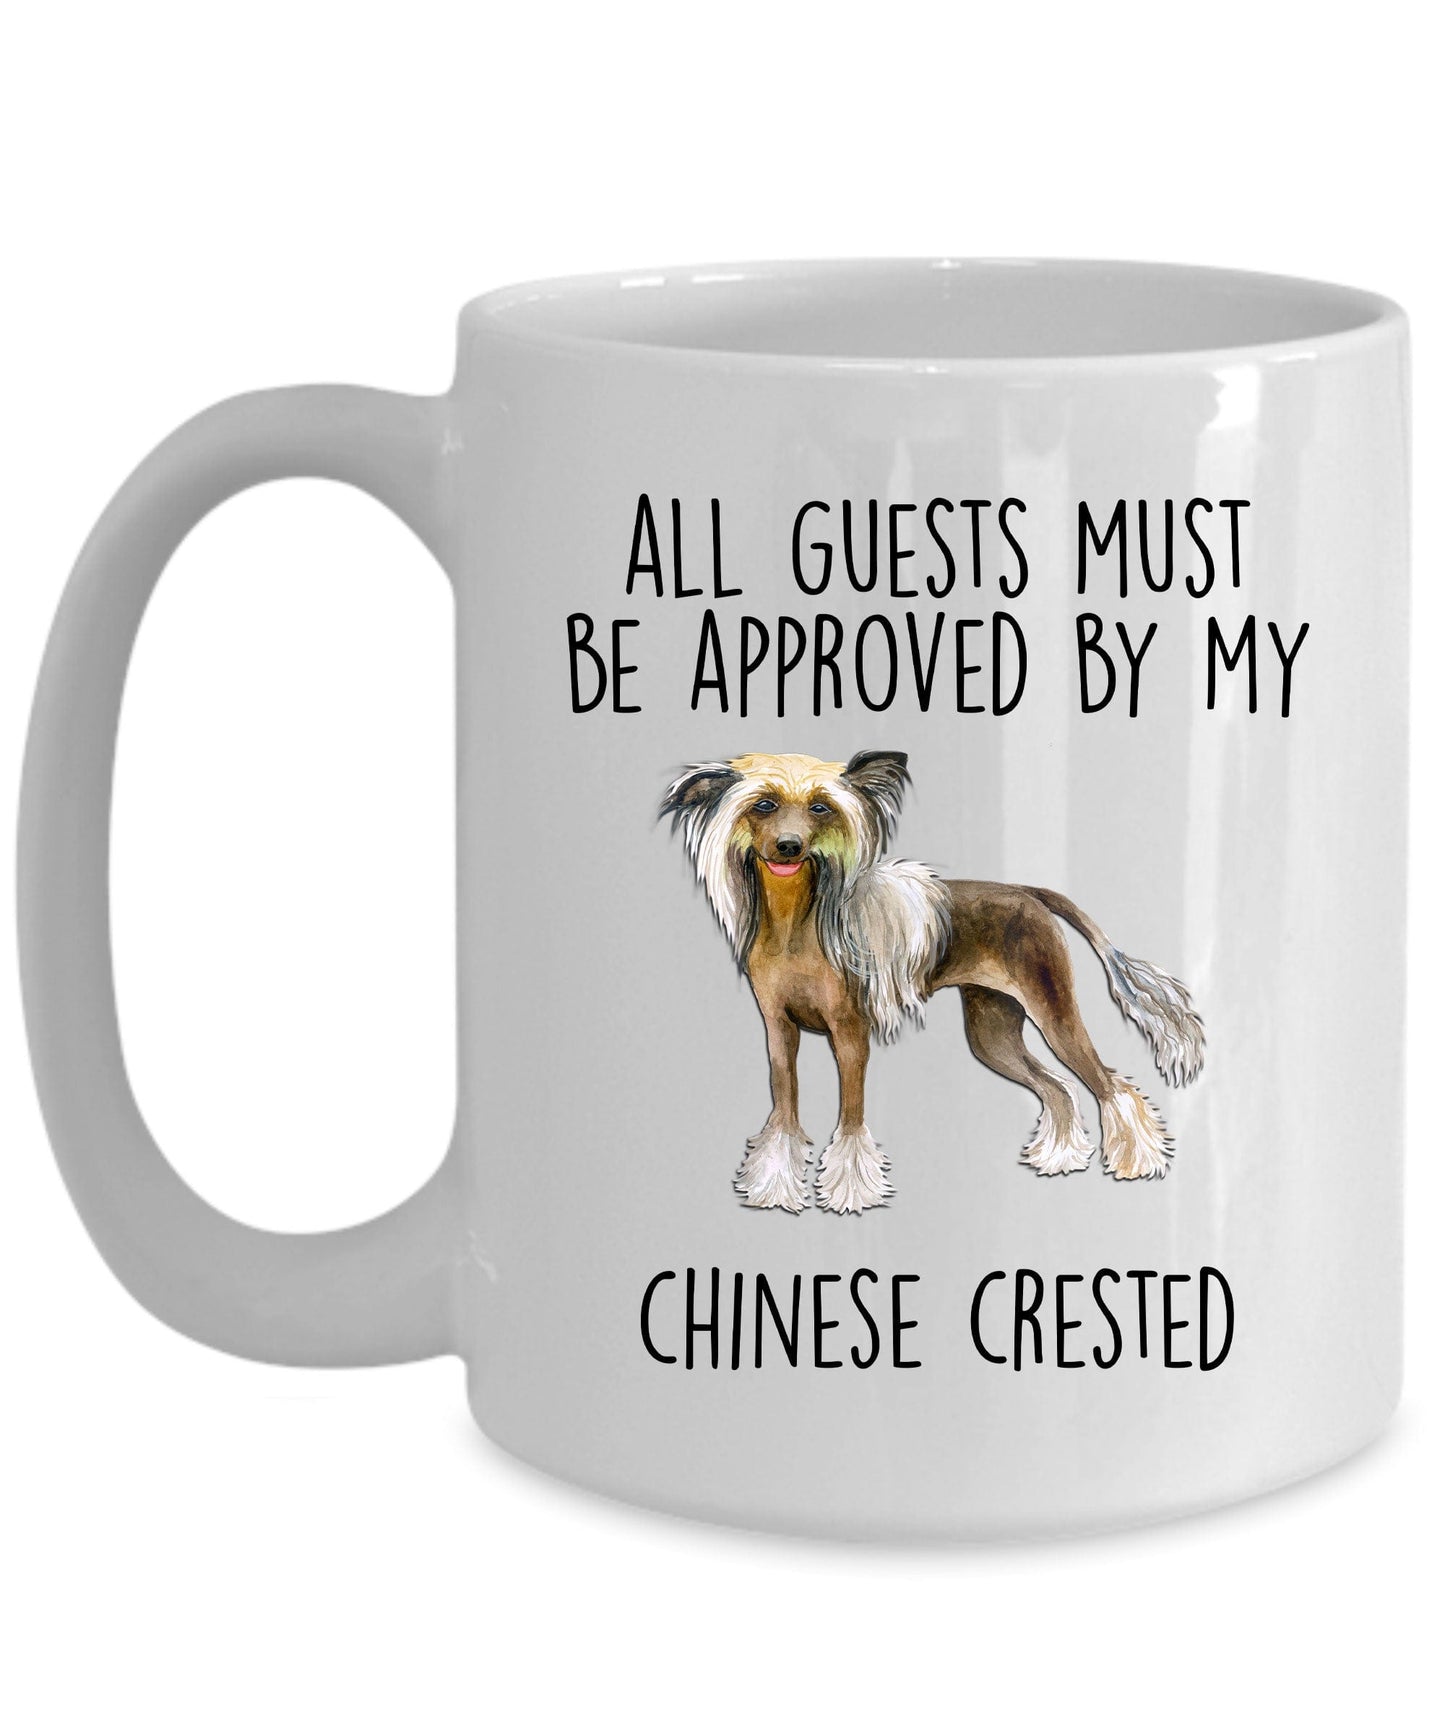 Chinese Crested Dog Funny Ceramic Coffee Mug - All guests must be approved by my Chinese Crested